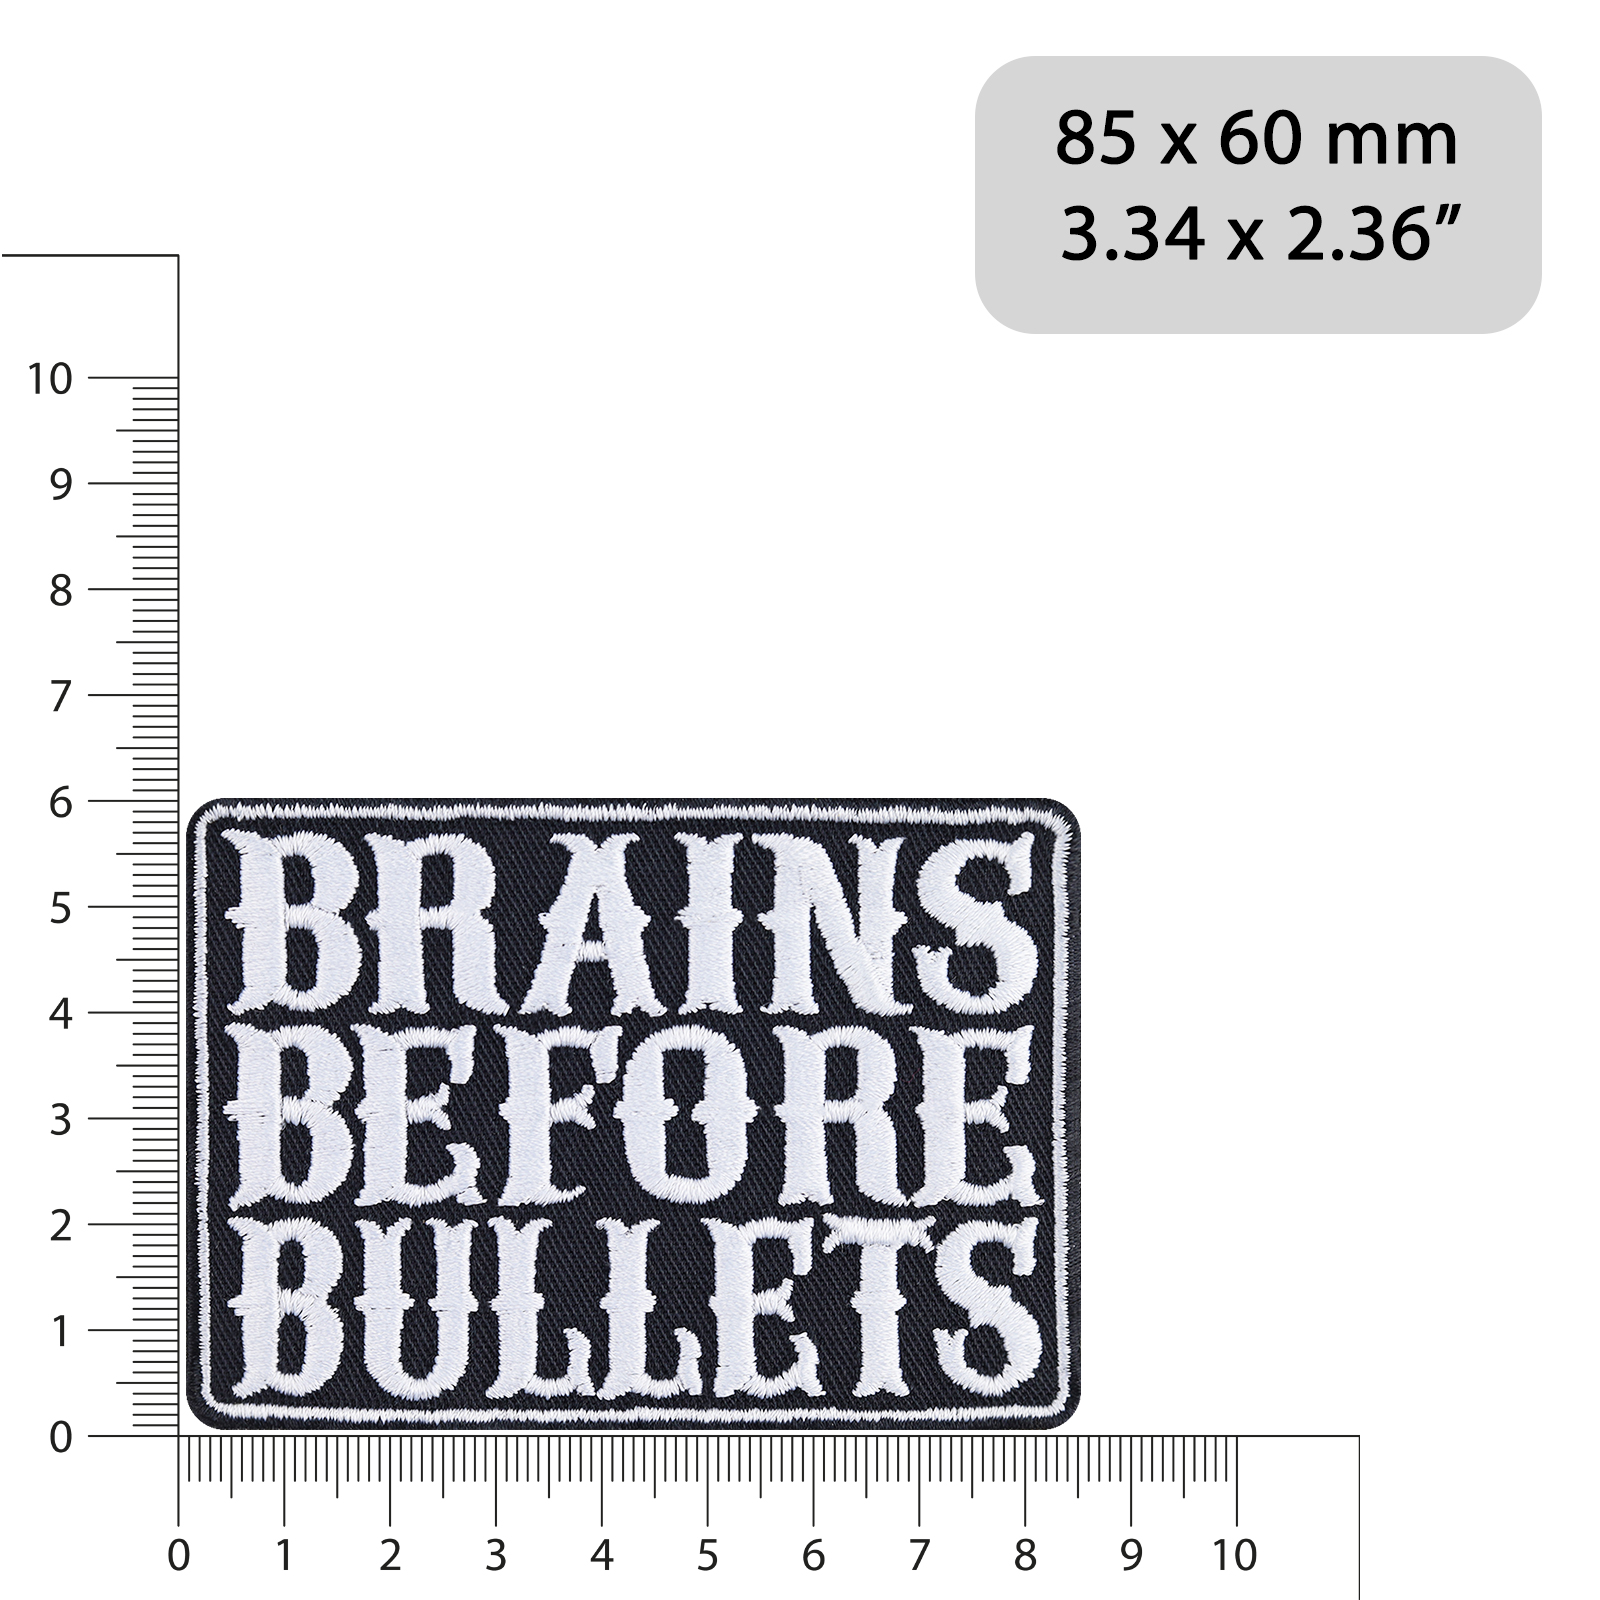 Brains before bullets - Patch